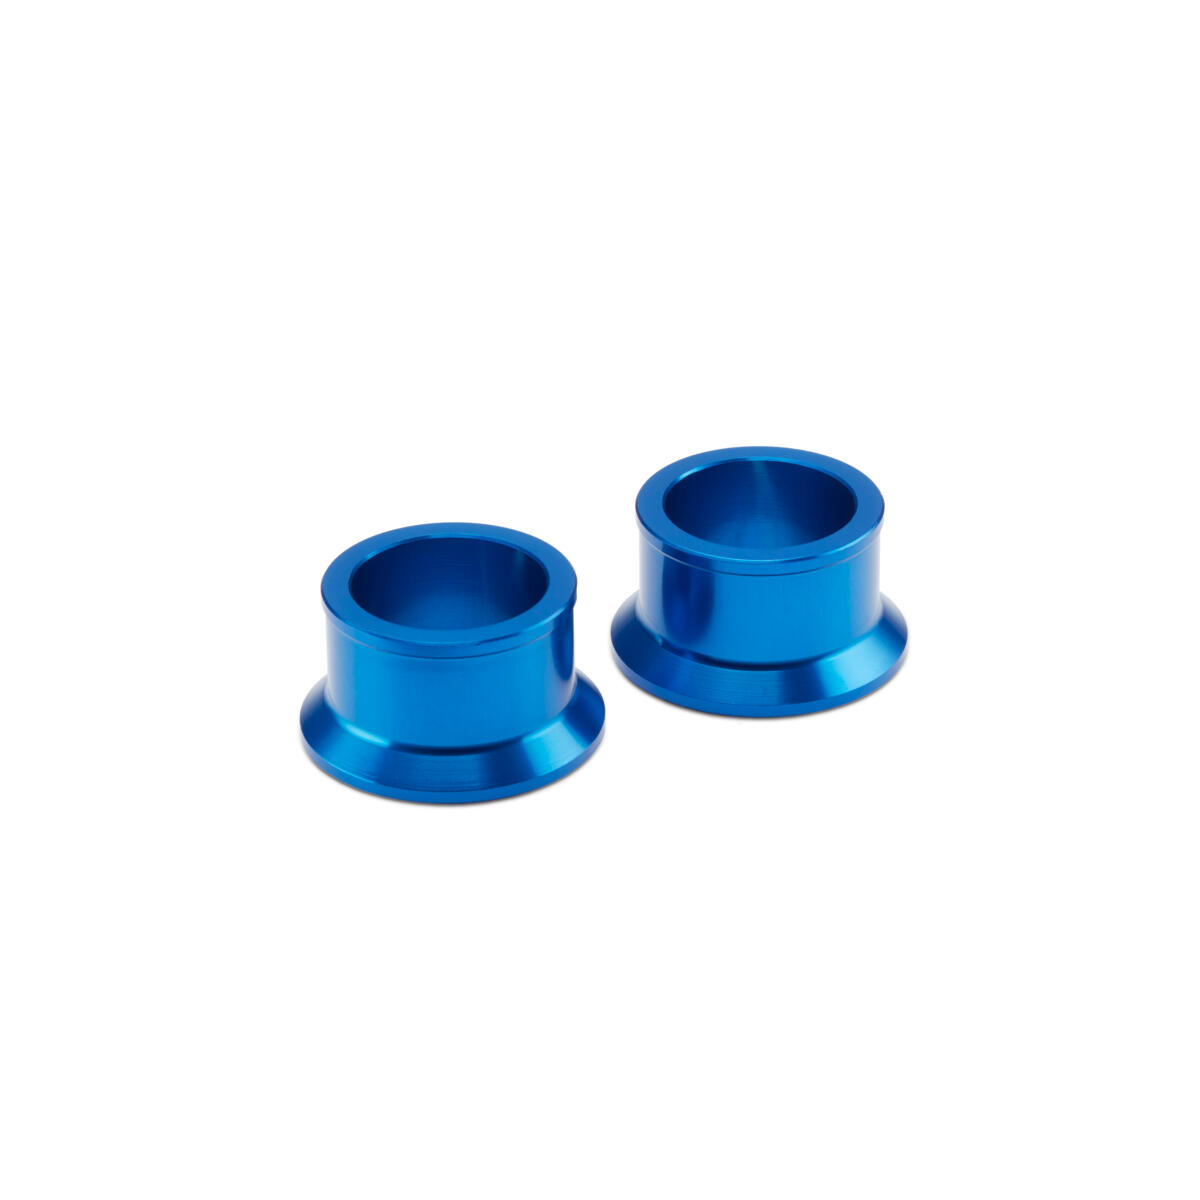 Get Factory Racing look and function with these blue 22mm rear wheel spacers.